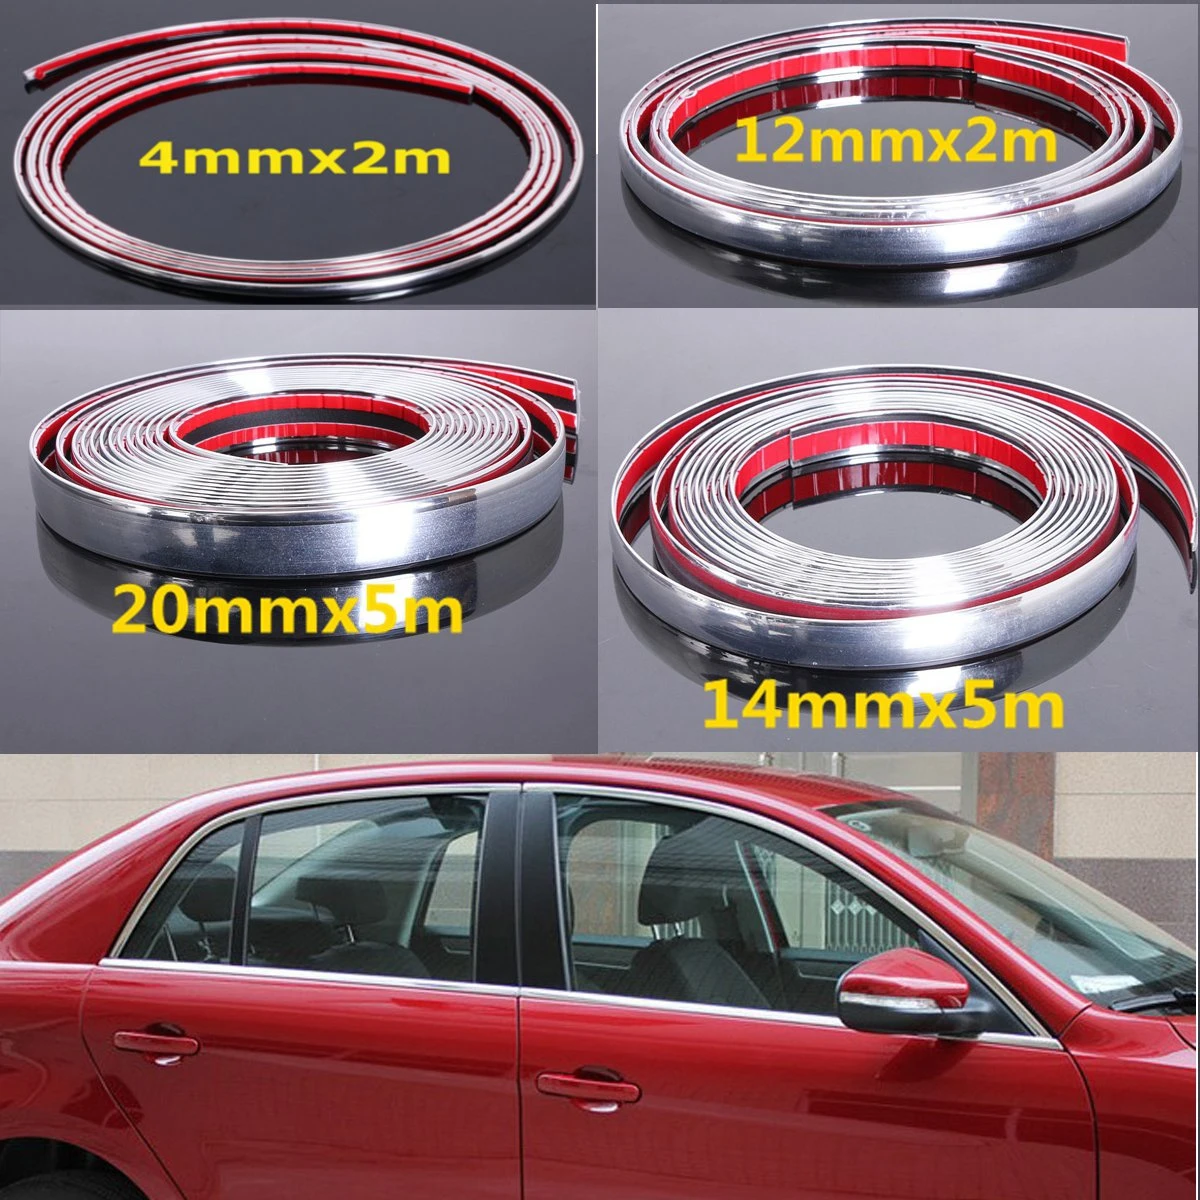 Car Chrome Styling Decoration Moulding Trim Strip Tape DIY Protective Sticker Cover 5/12mmx2m / 14/20mmx5m